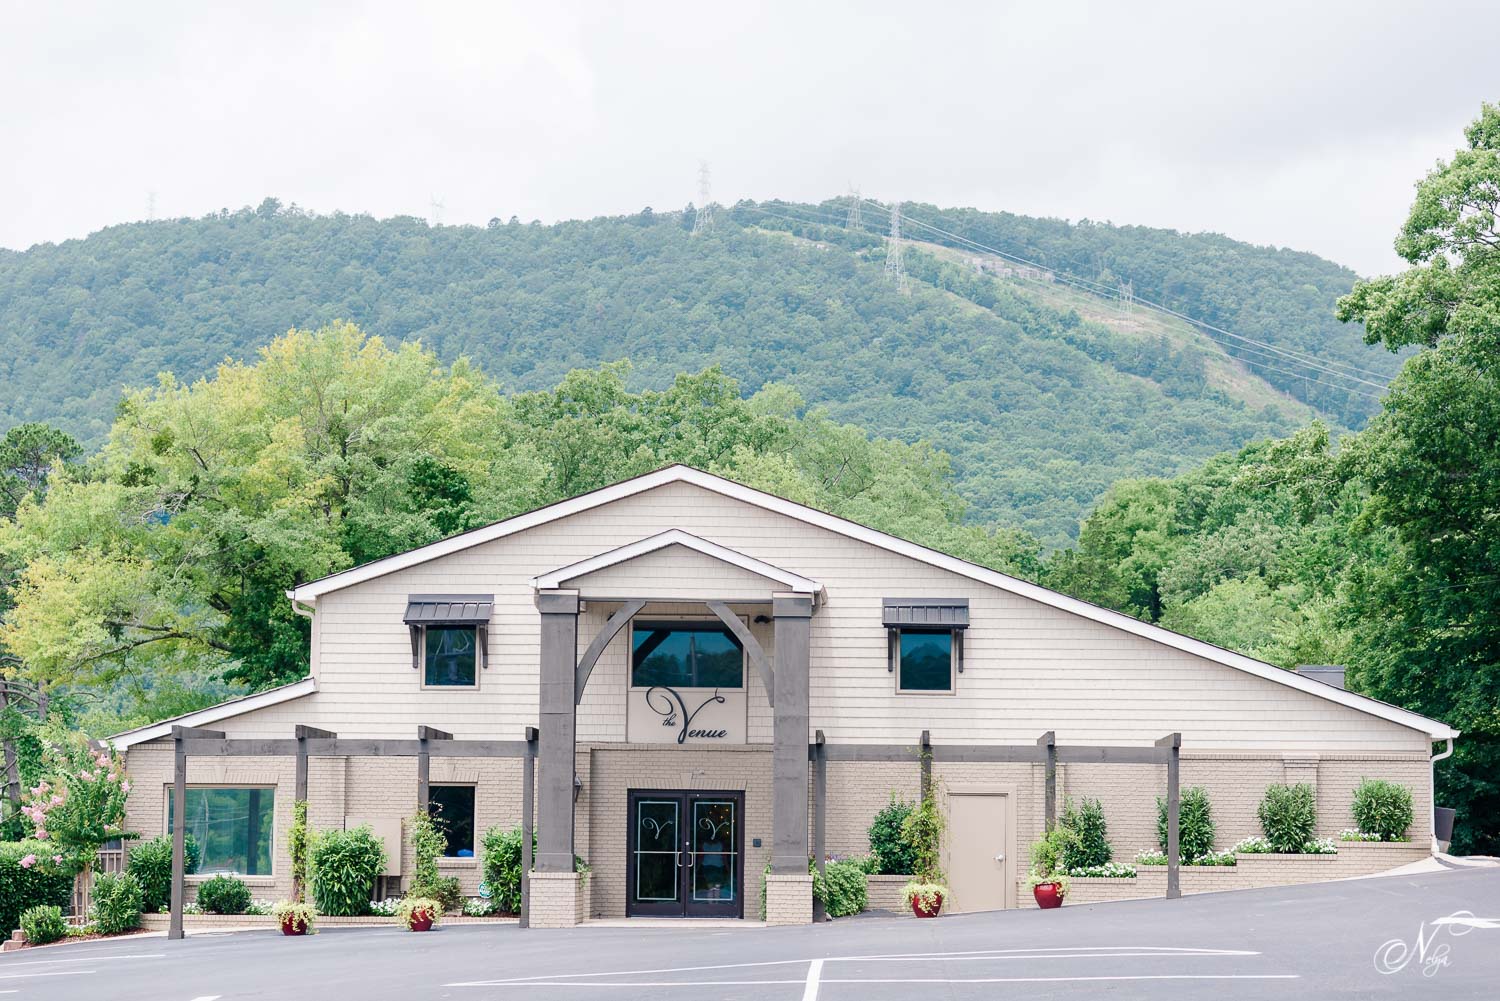 Front view of The reception veunue with the Chattanooga hills in the background near interstate 24